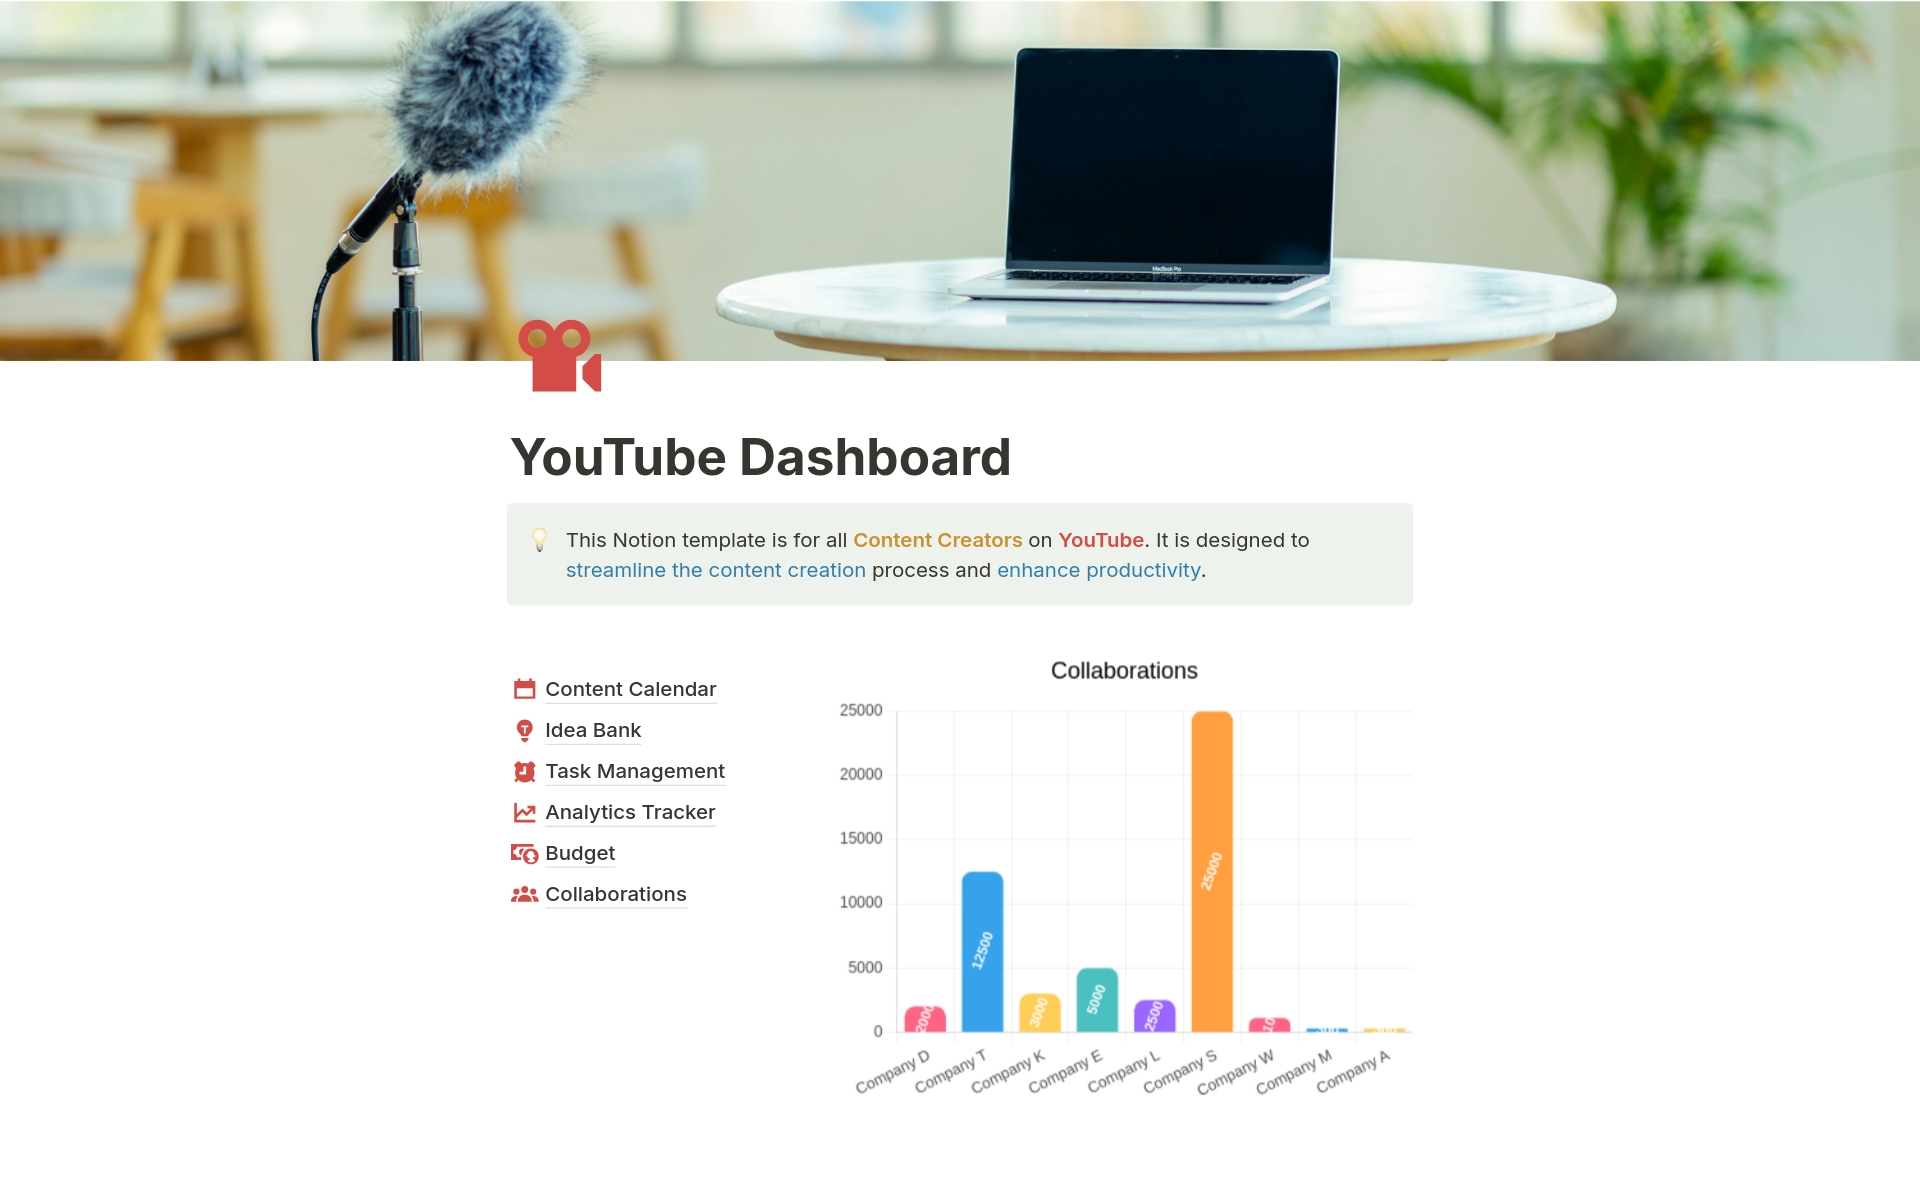 The YouTube Dashboard Notion template is an essential tool for content creators, social media managers, and digital marketers to effectively plan, organize, and track their YouTube content and channel performance.